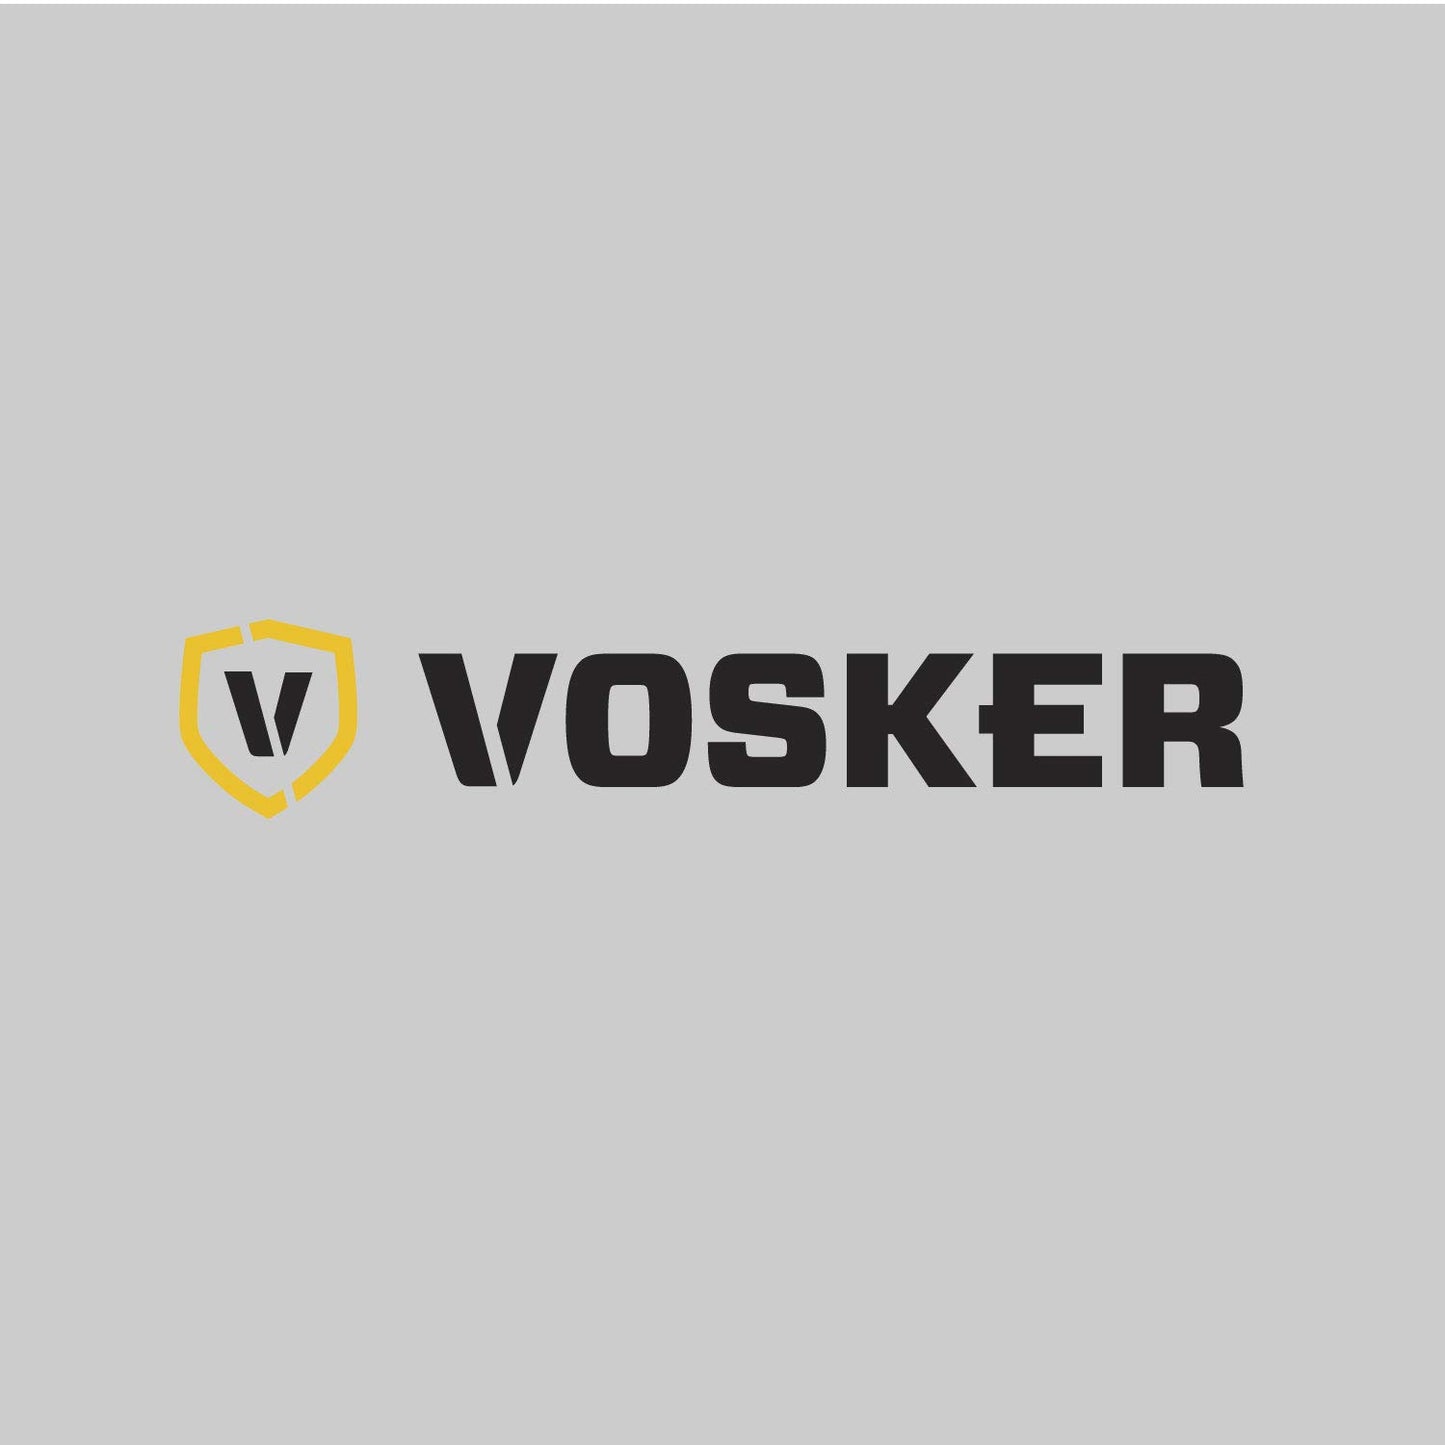 Vosker Long Range Cellular Antenna for Surveillance Camera, V100, V200 and Universal Cam Compatible Ultra Strong Signal Strength 15 Ft Cable (Antenna)